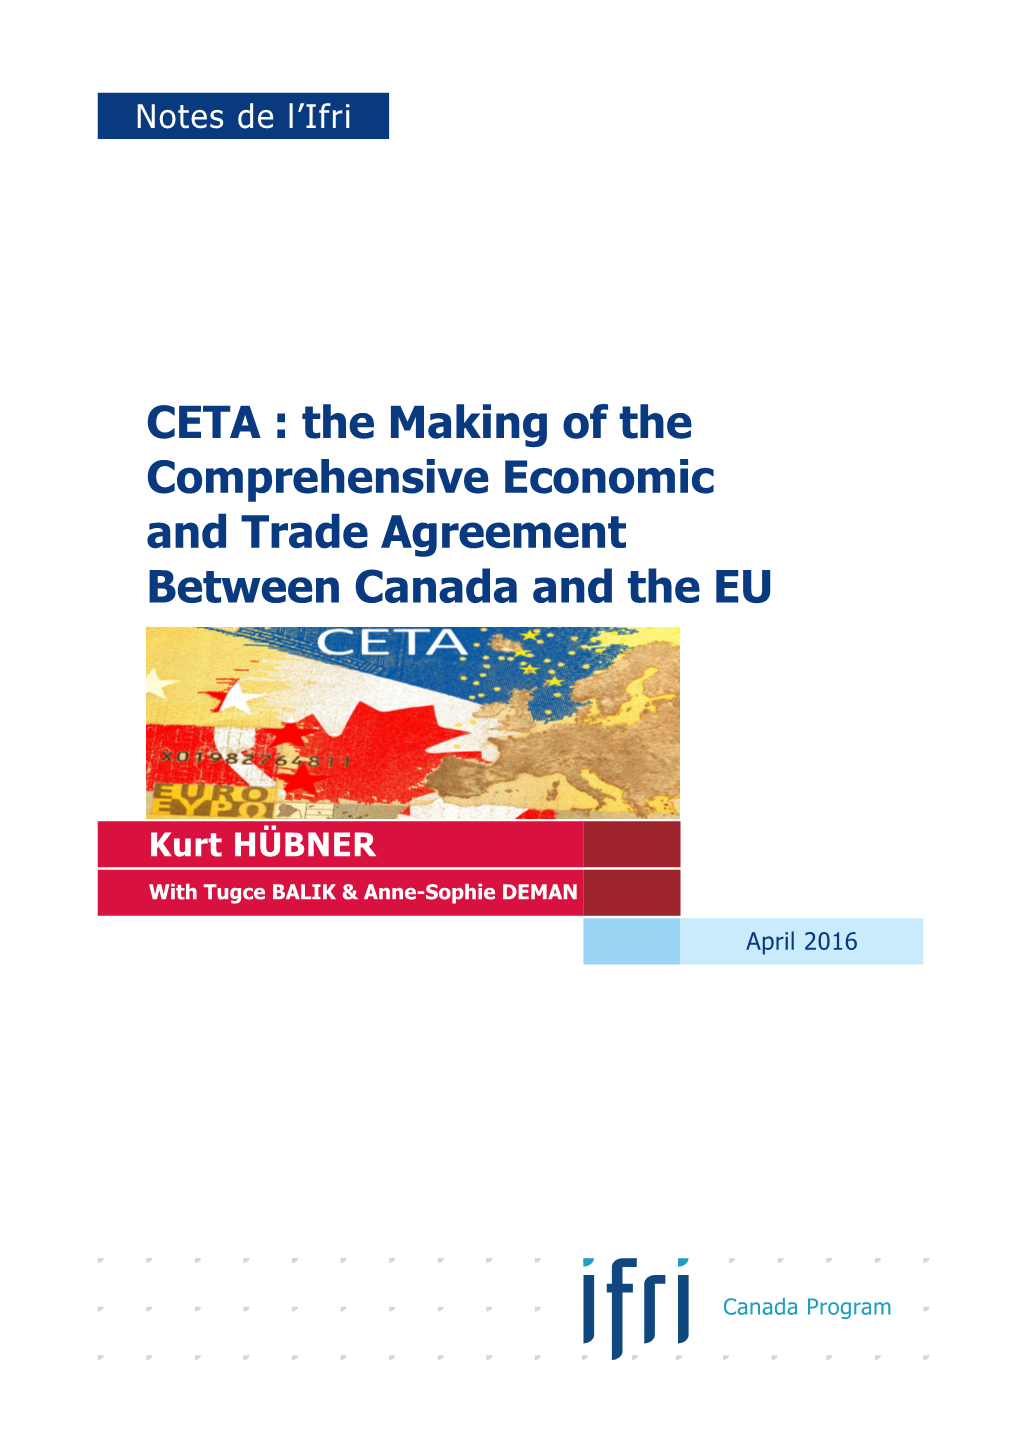 CETA: the Making of the Comprehensive Economic and Trade Agreement Between Canada and the EU